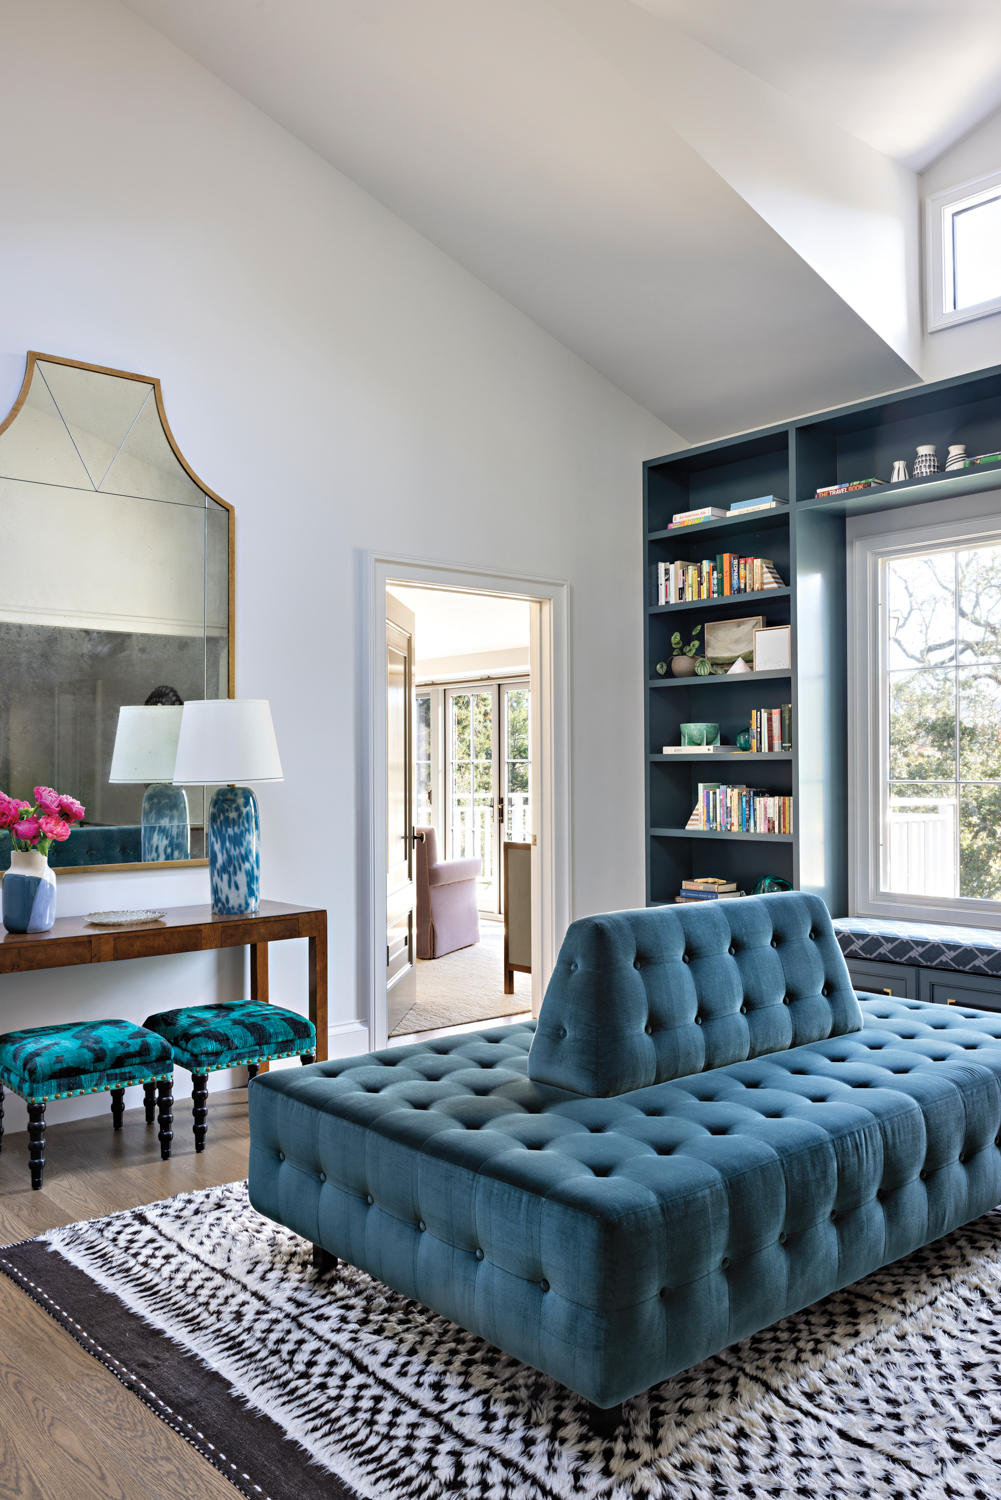 A blue tufted settee allows...